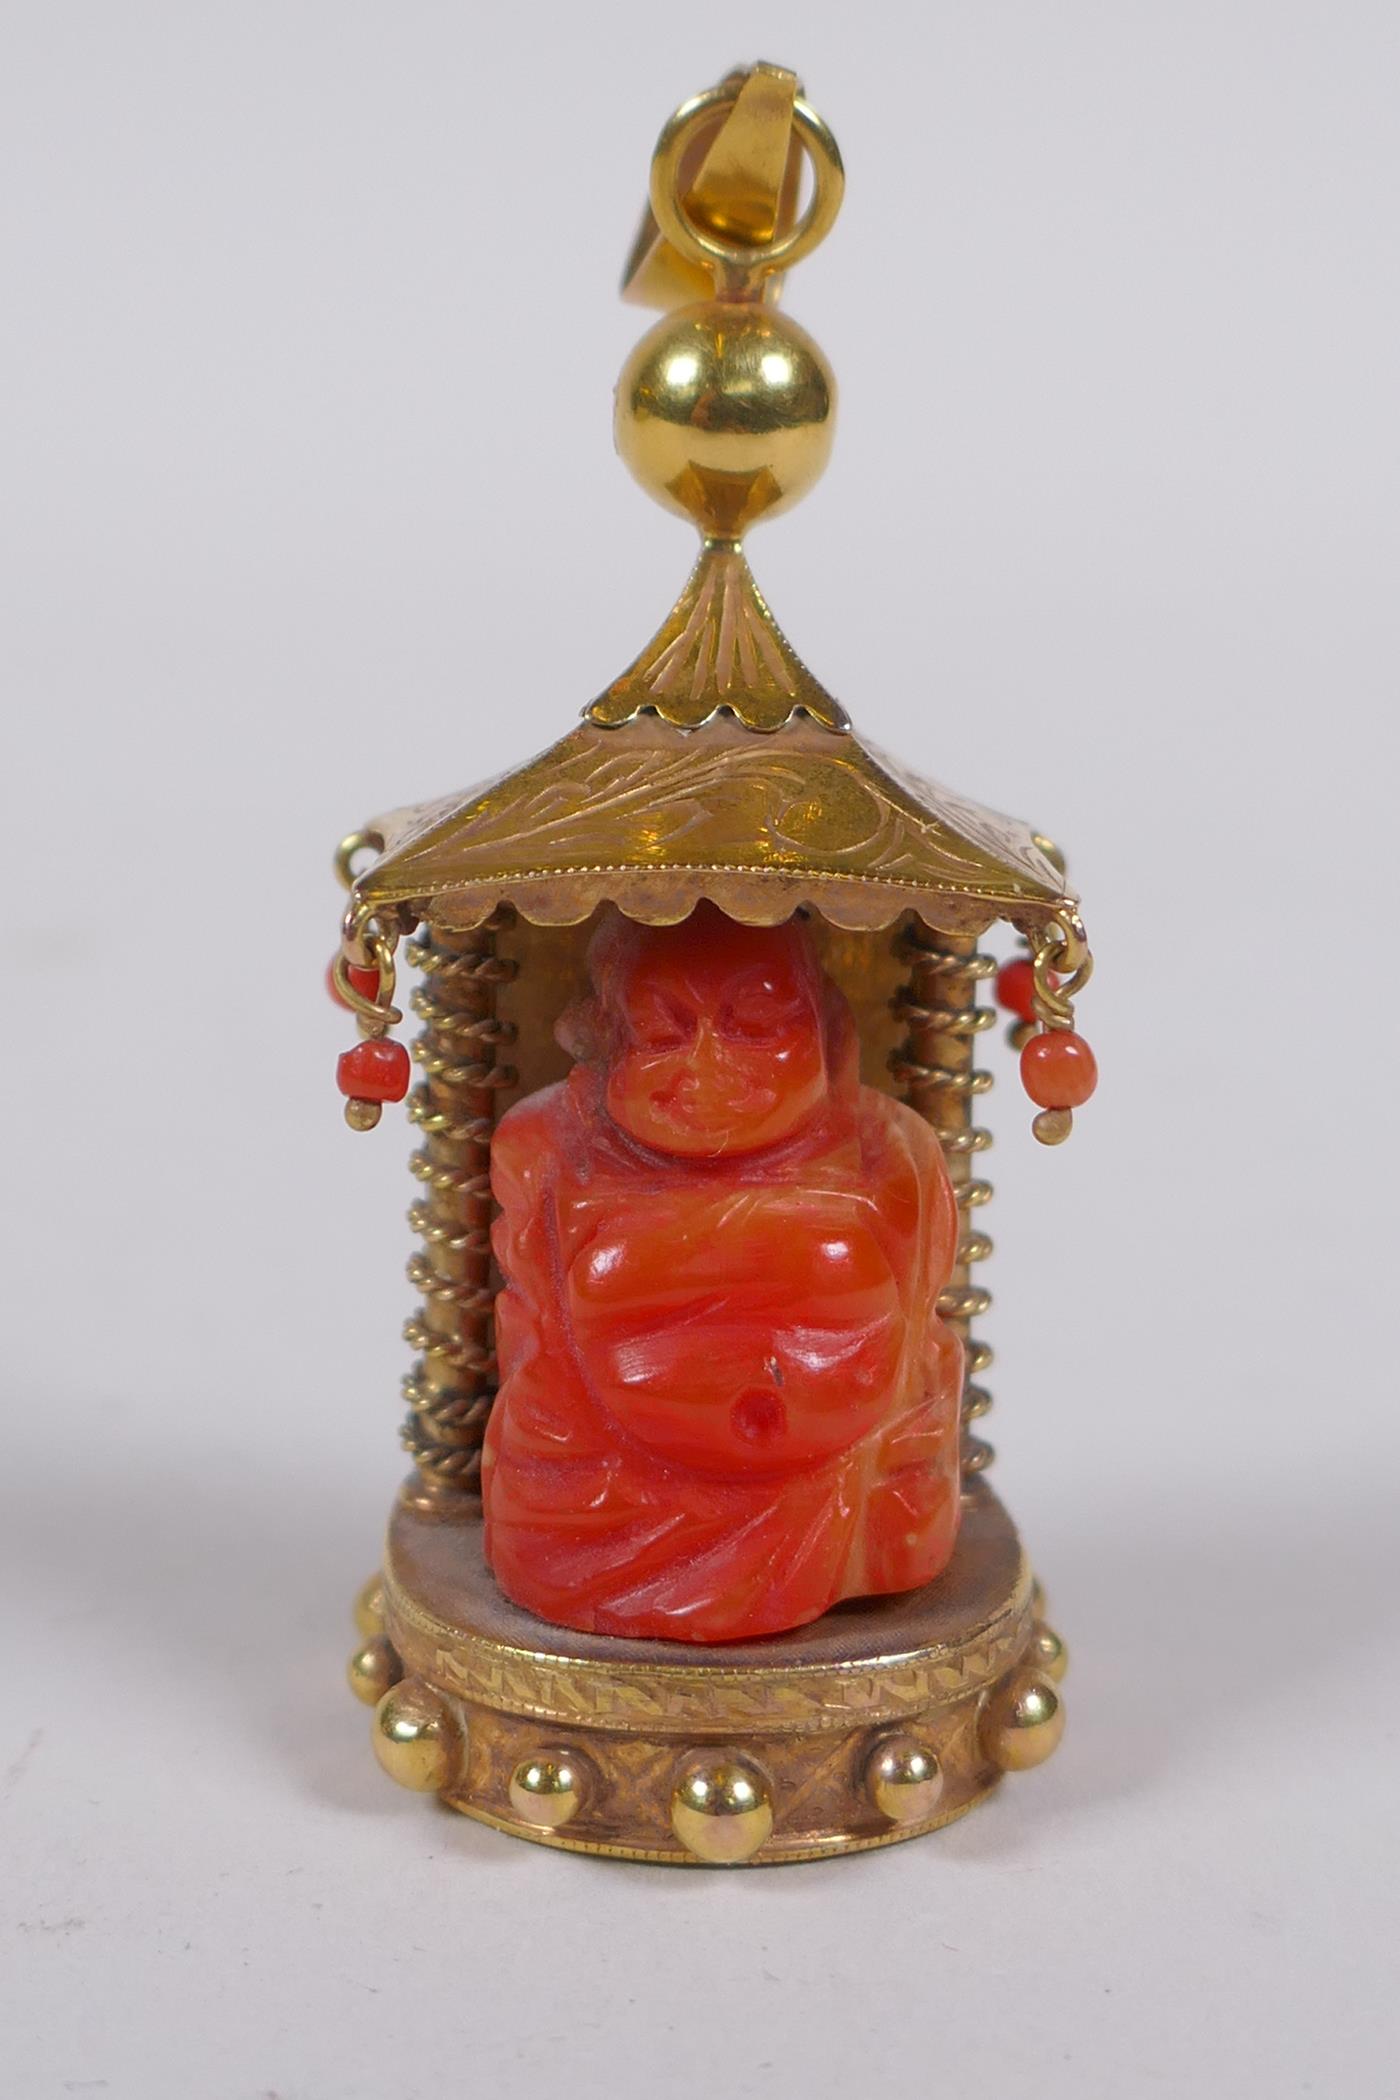 A 9ct gold pendant in the form of a shrine with carved coral figure of Buddha, 22.2g gross